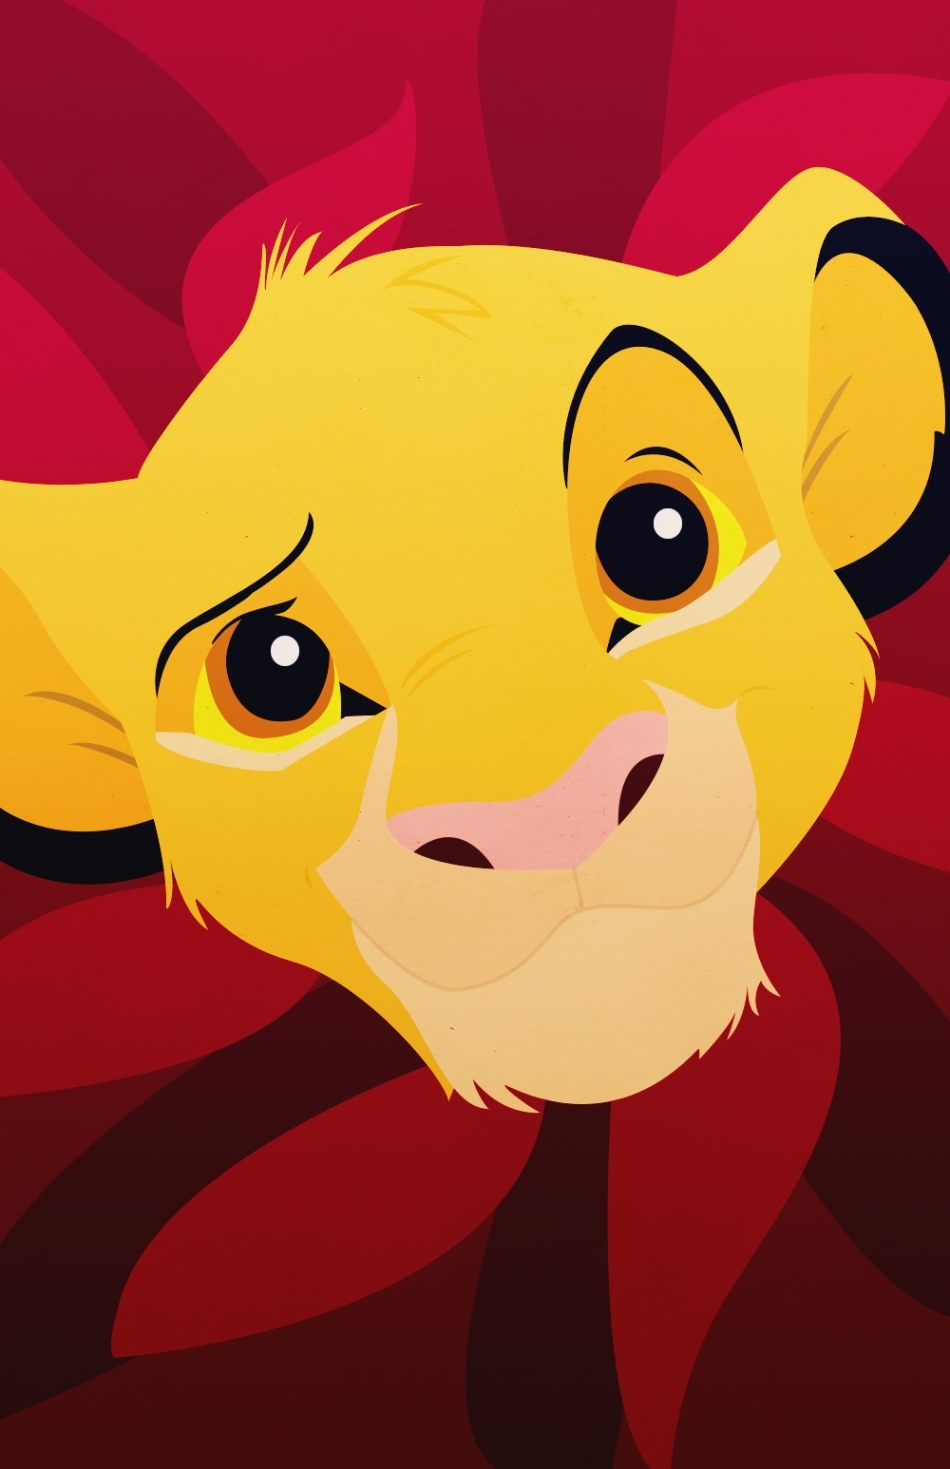 Image About Wallpaper Lion King Simba iPhone